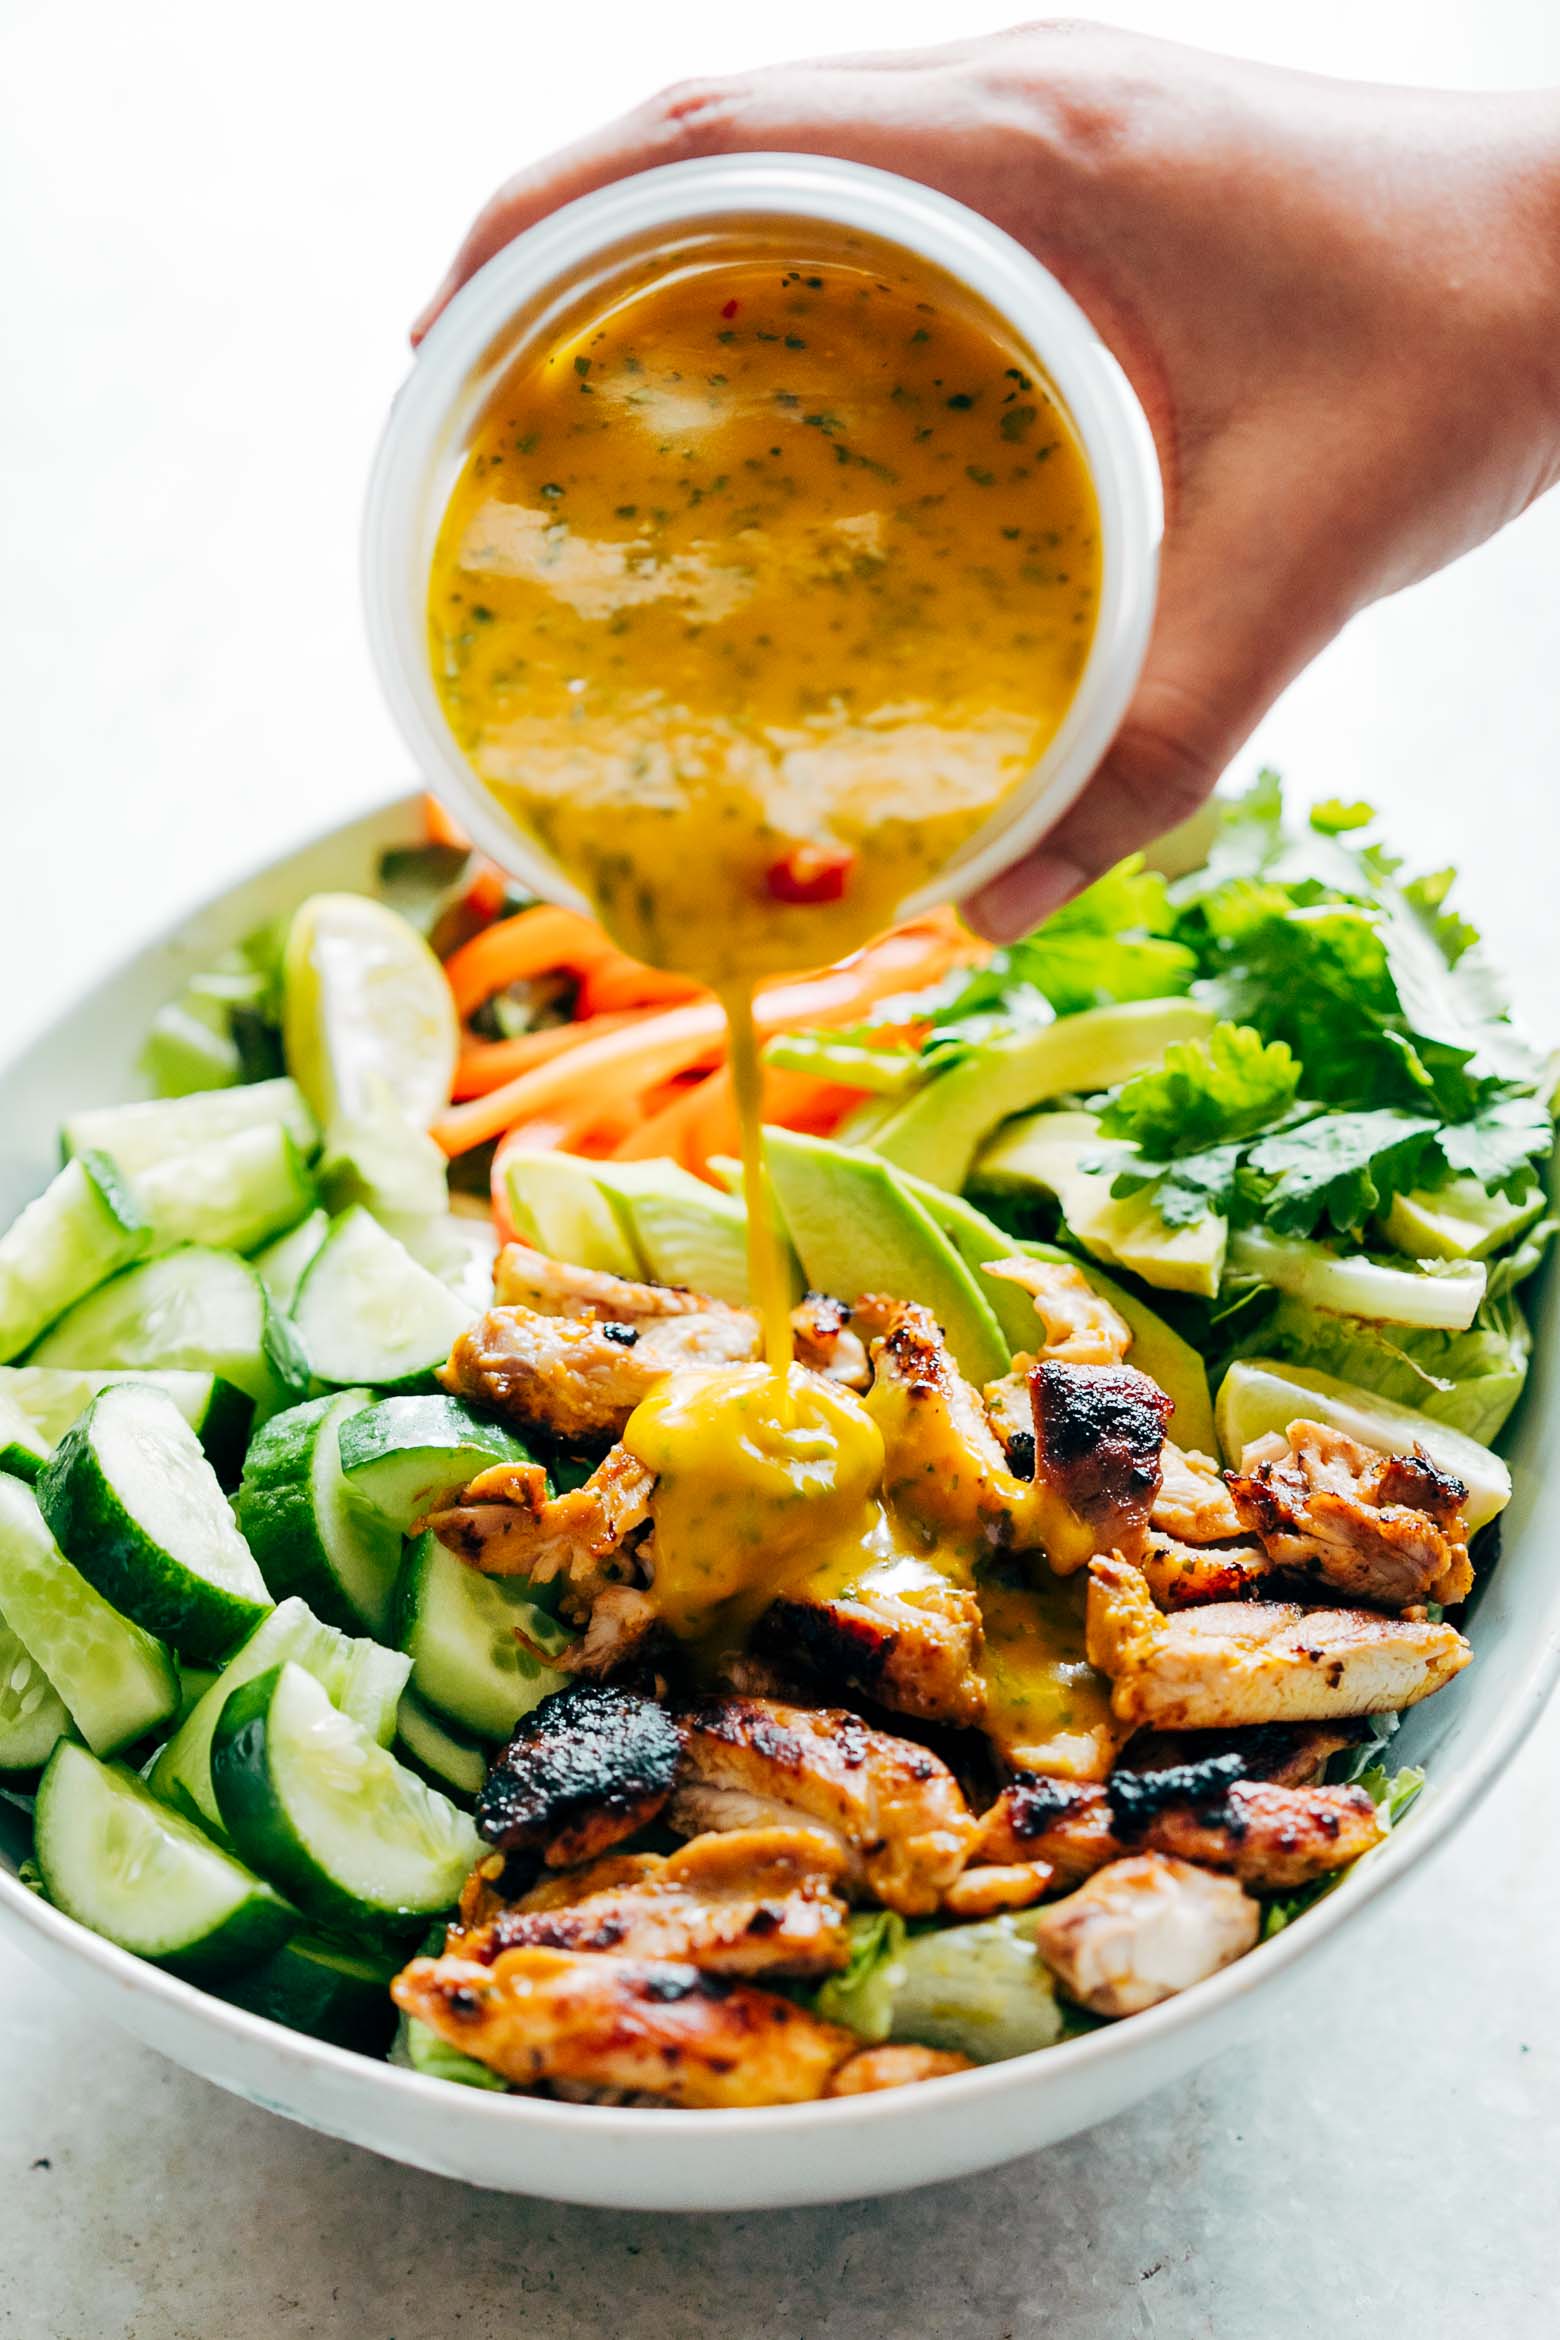 Grilled Chicken Mango Salad with Mango Cilantro Dressing is loaded with cucumbers, peppers, avocado and has a crazy good dressing that doubles up as a marinade!  Best summer salad ever!